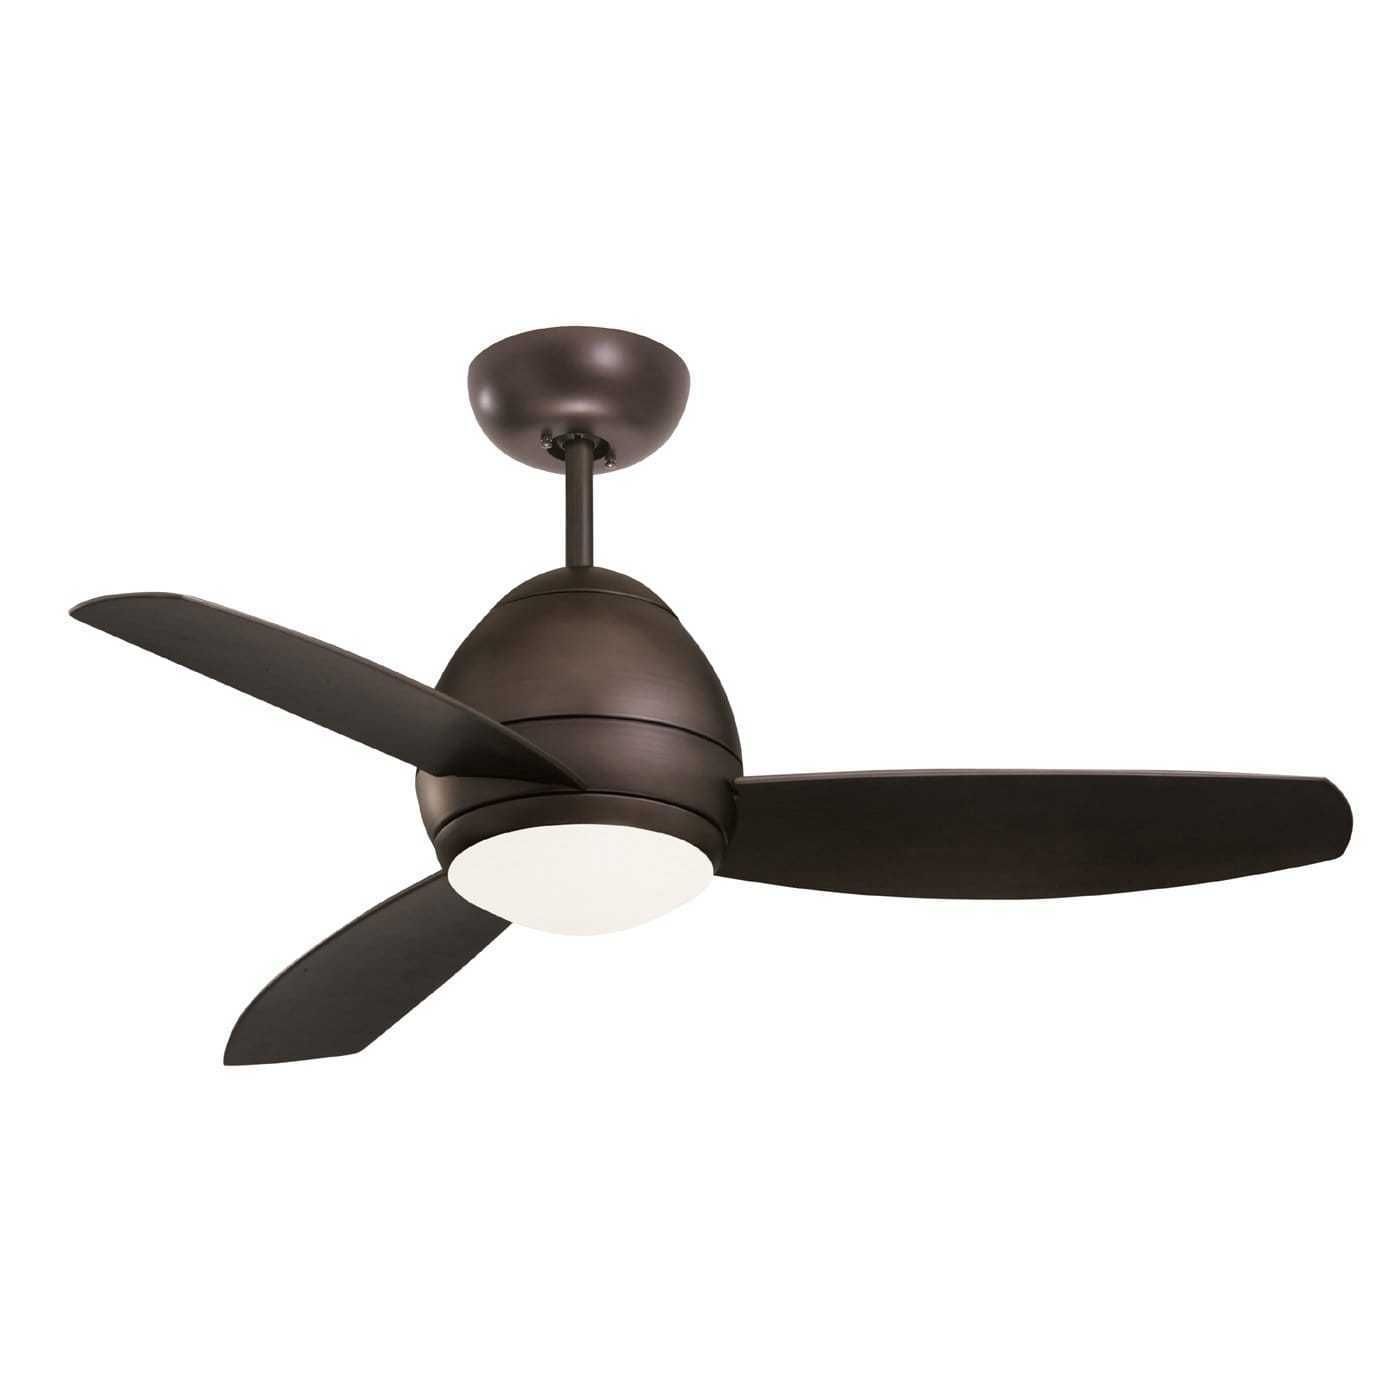 Emerson Cf252orb Curva Oil Rubbed Bronze 52" Outdoor Ceiling Fan For Outdoor Ceiling Fans With Lights At Ebay (View 8 of 15)